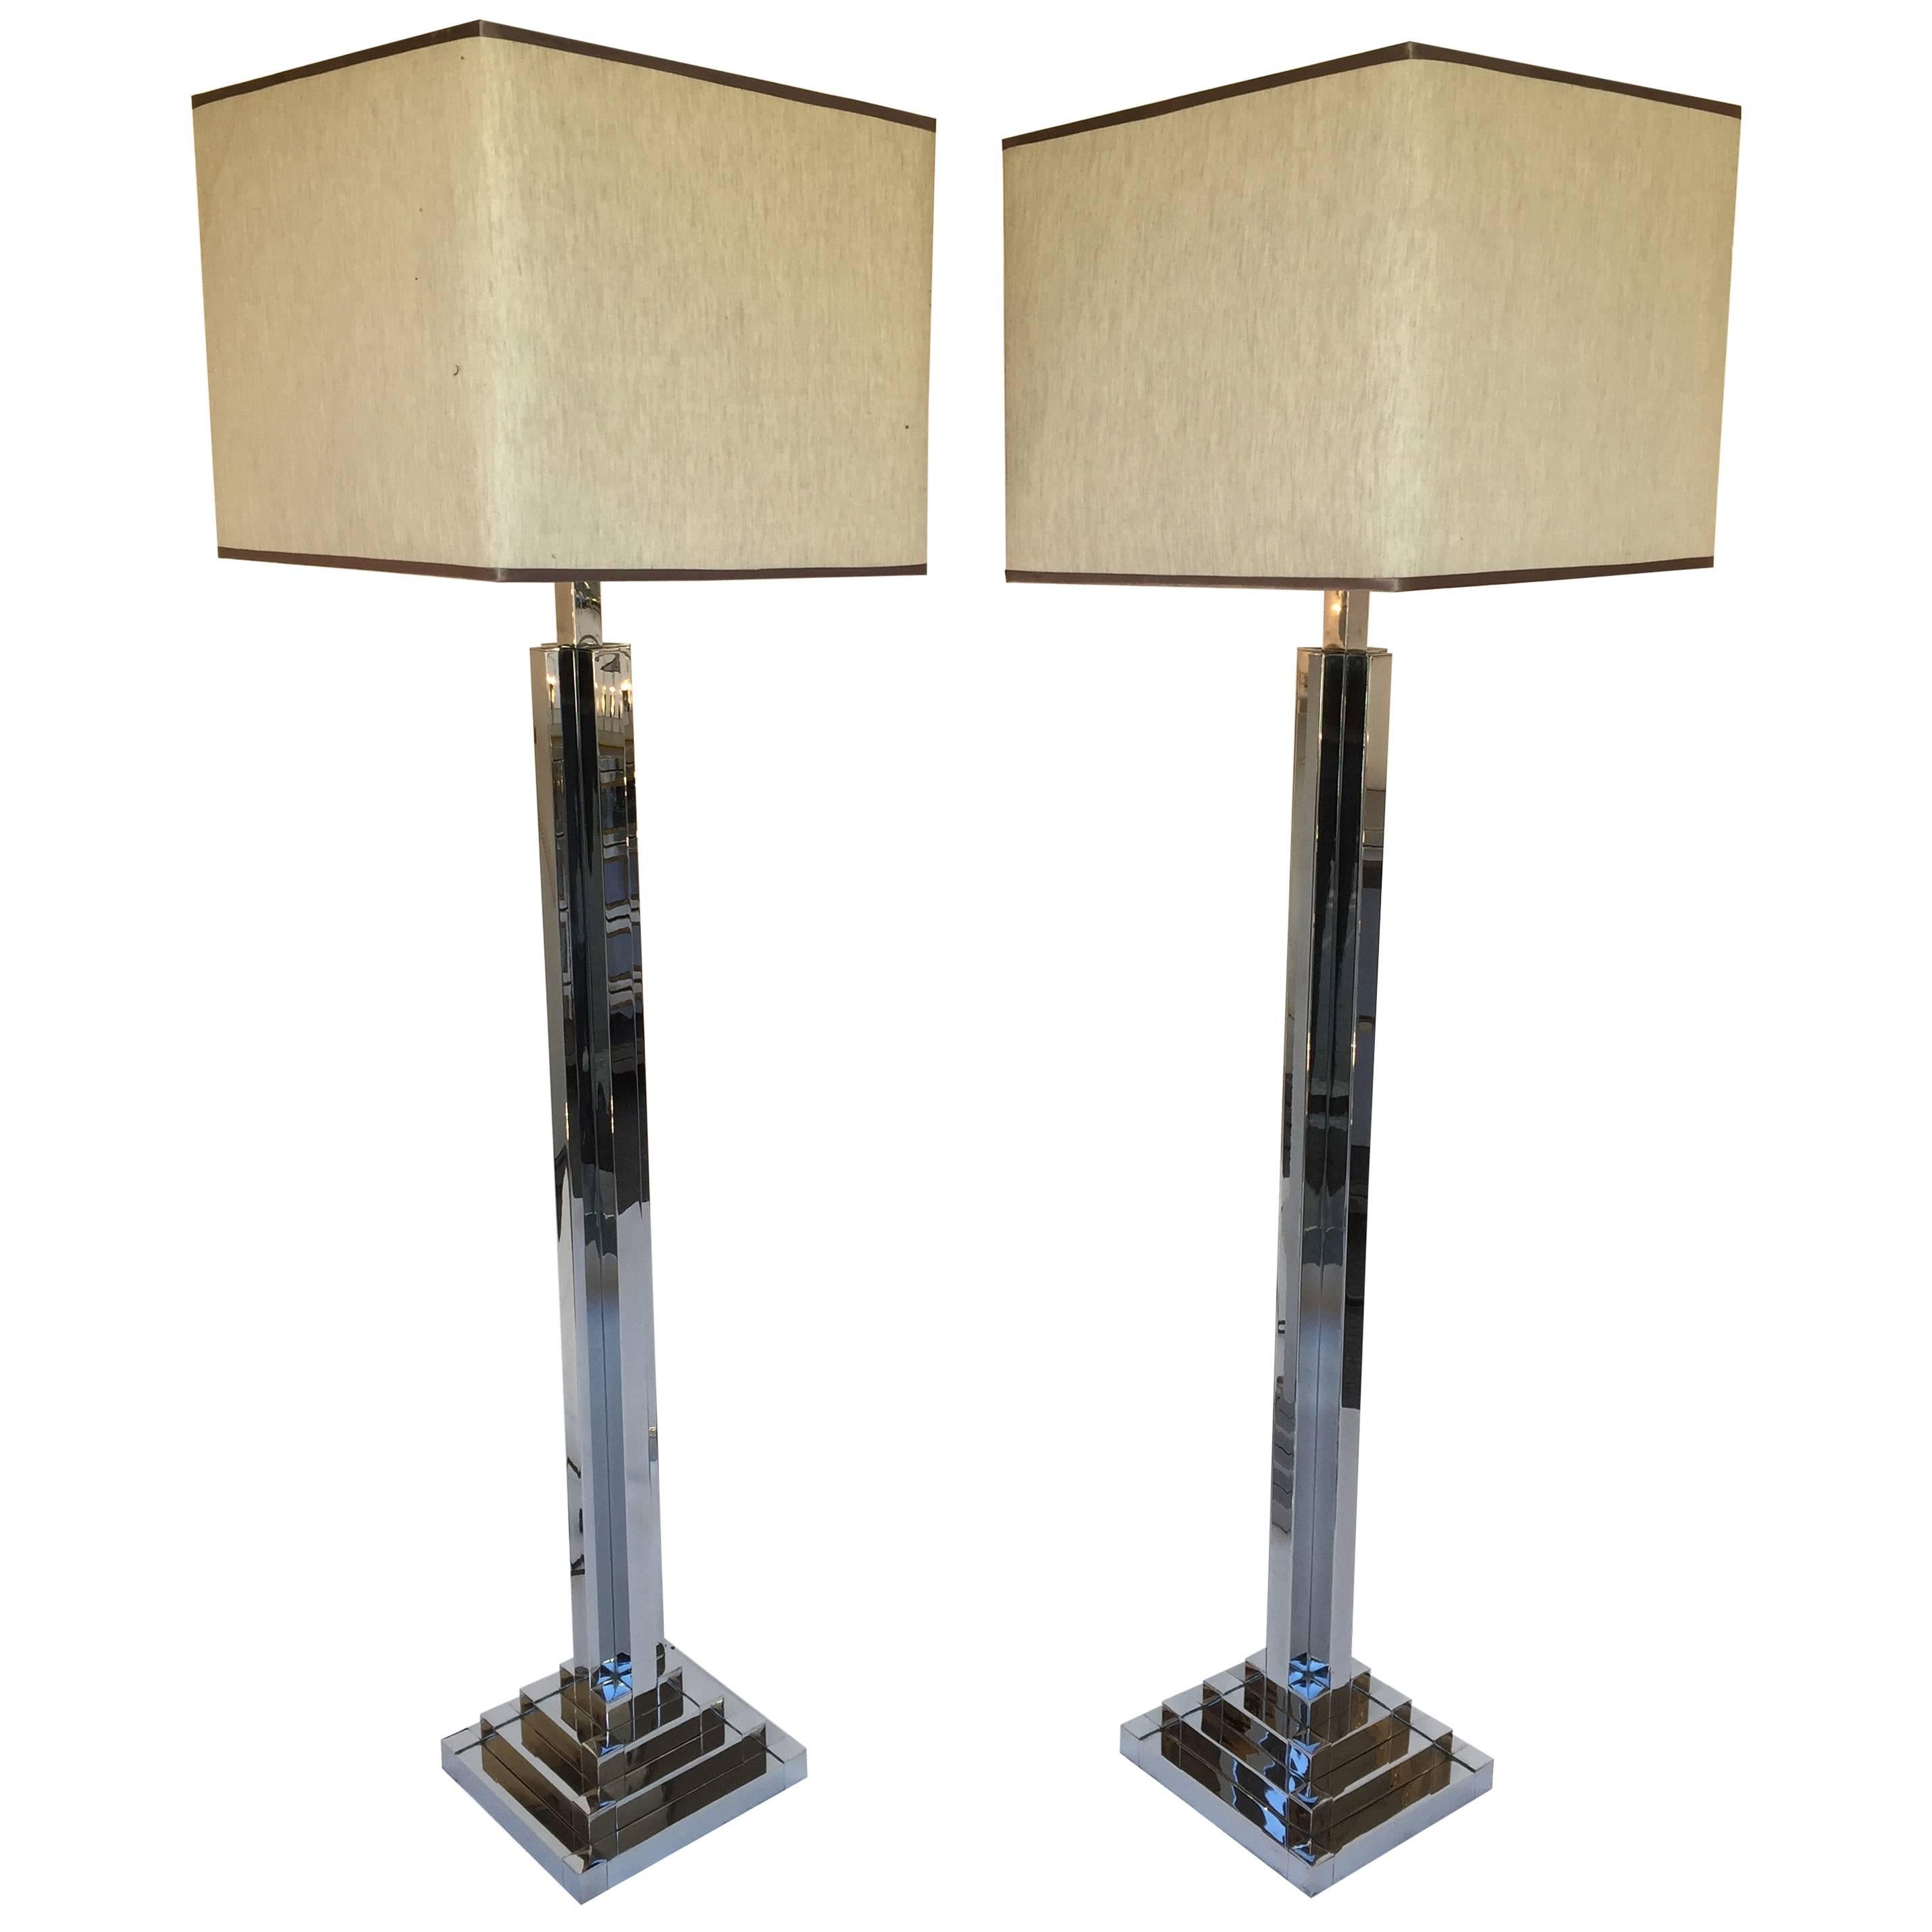 Pair of Floor Lamps by Willy Rizzo for Lumica, Italy, 1970